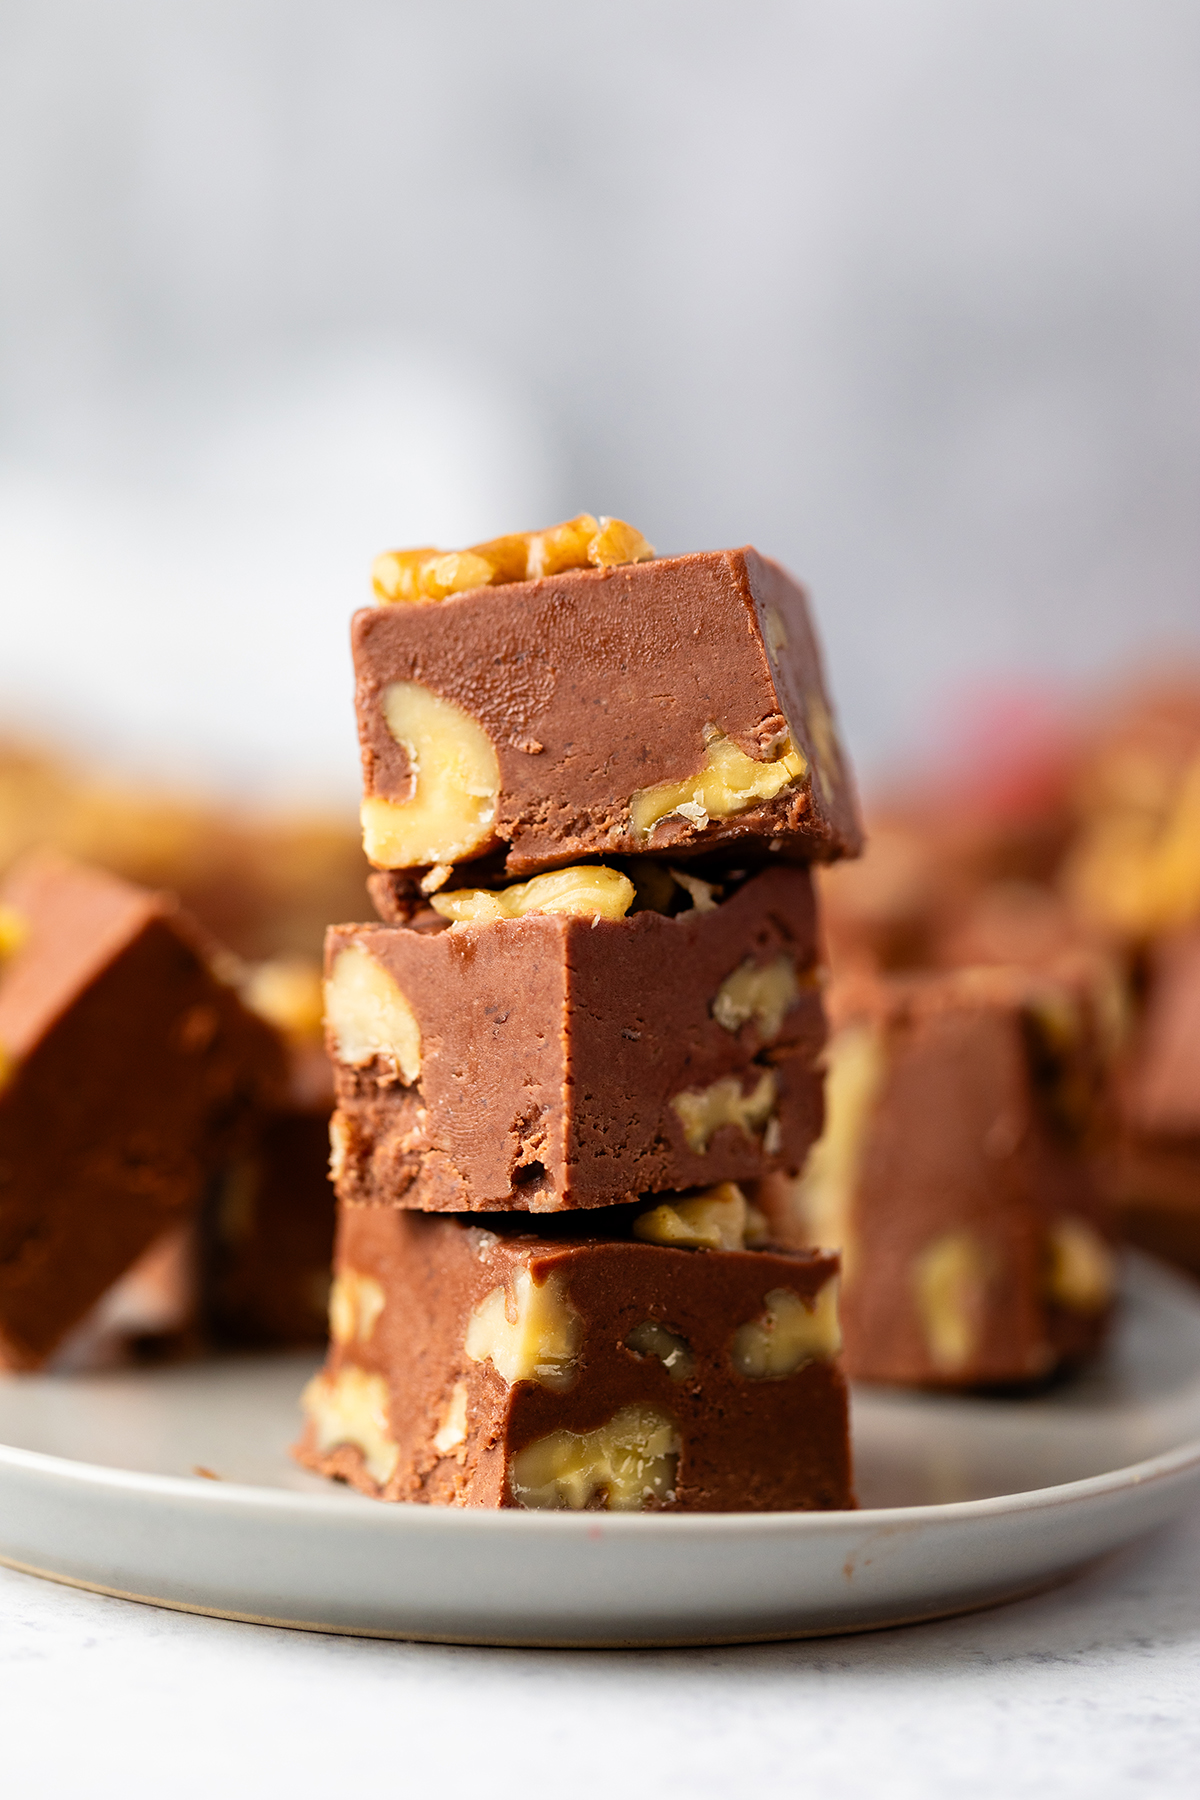 Copycat Old-Fashioned See's Candy Fudge Recipe